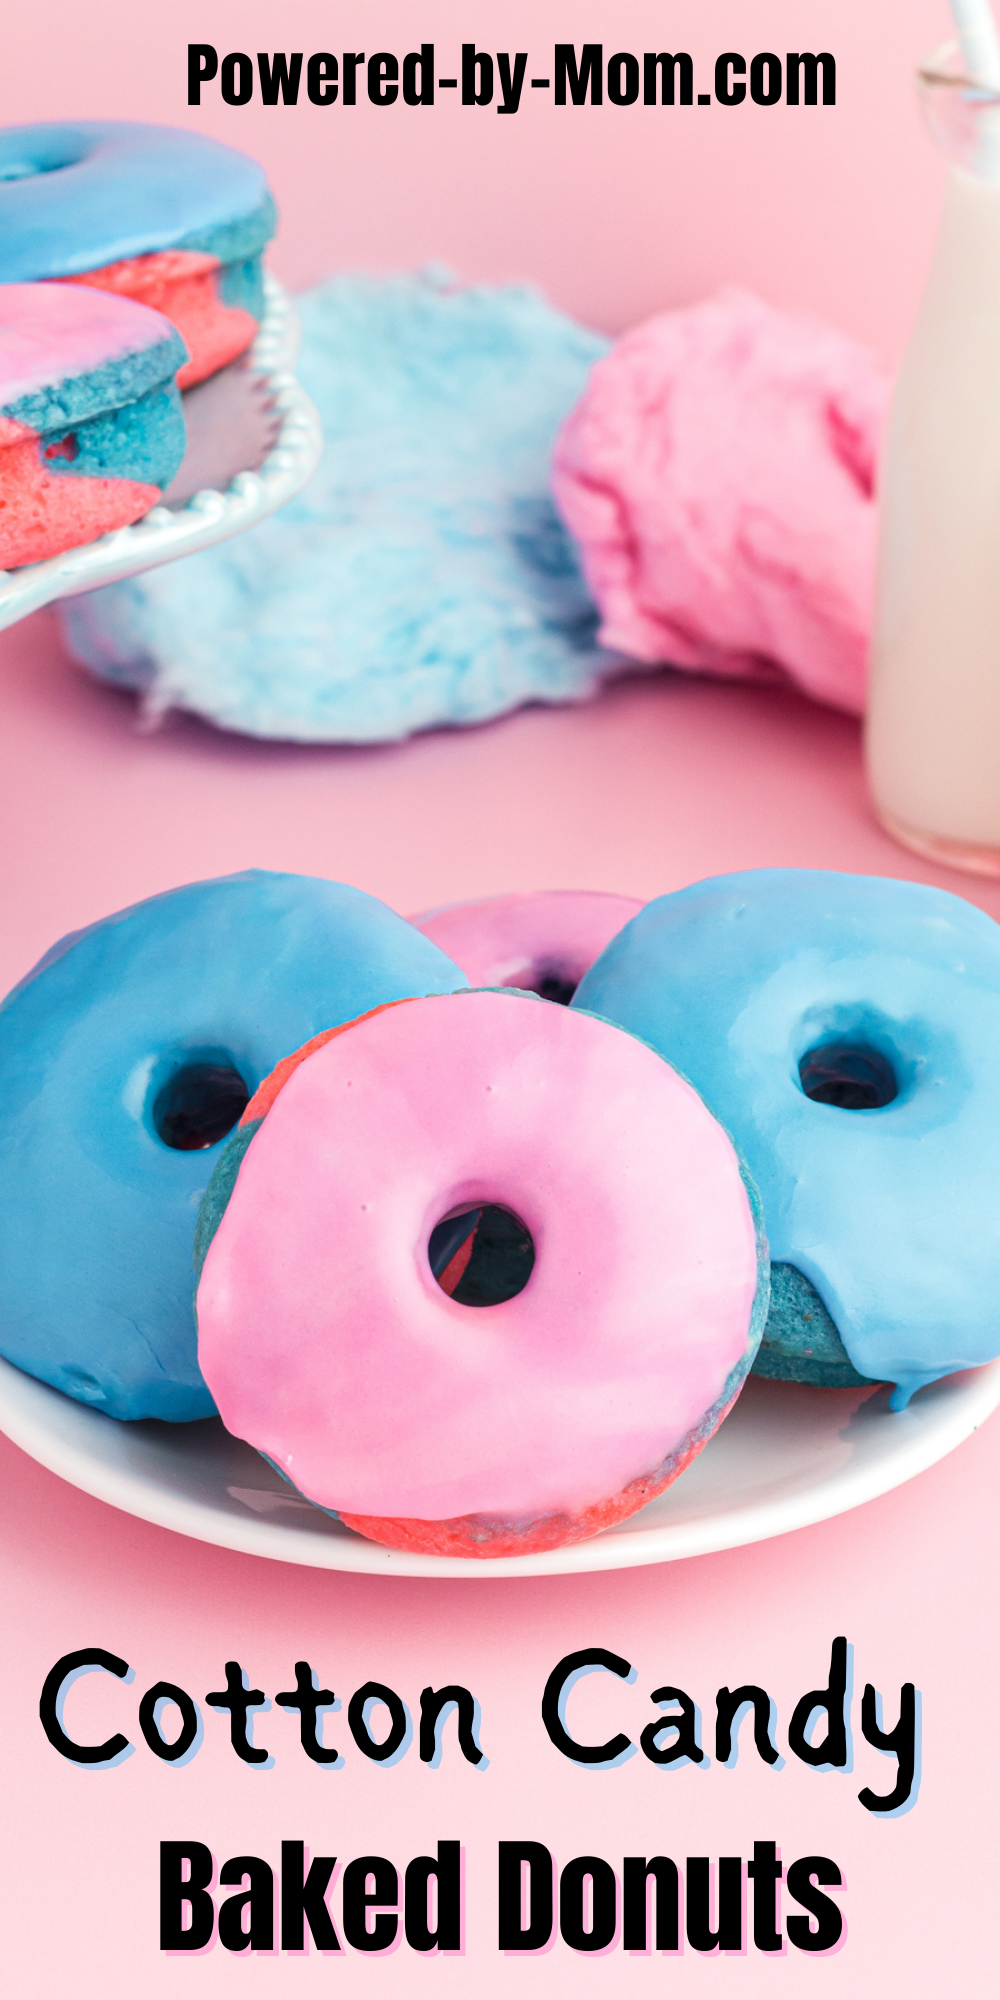 These cotton candy donuts make for a fluffy baked donuts recipe that is easy to make, full of flavor and can be ready in an hour or less! The cotton candy extract and glaze make these donuts scrumptious, colorful and pretty to look at too! Get the recipe now. 